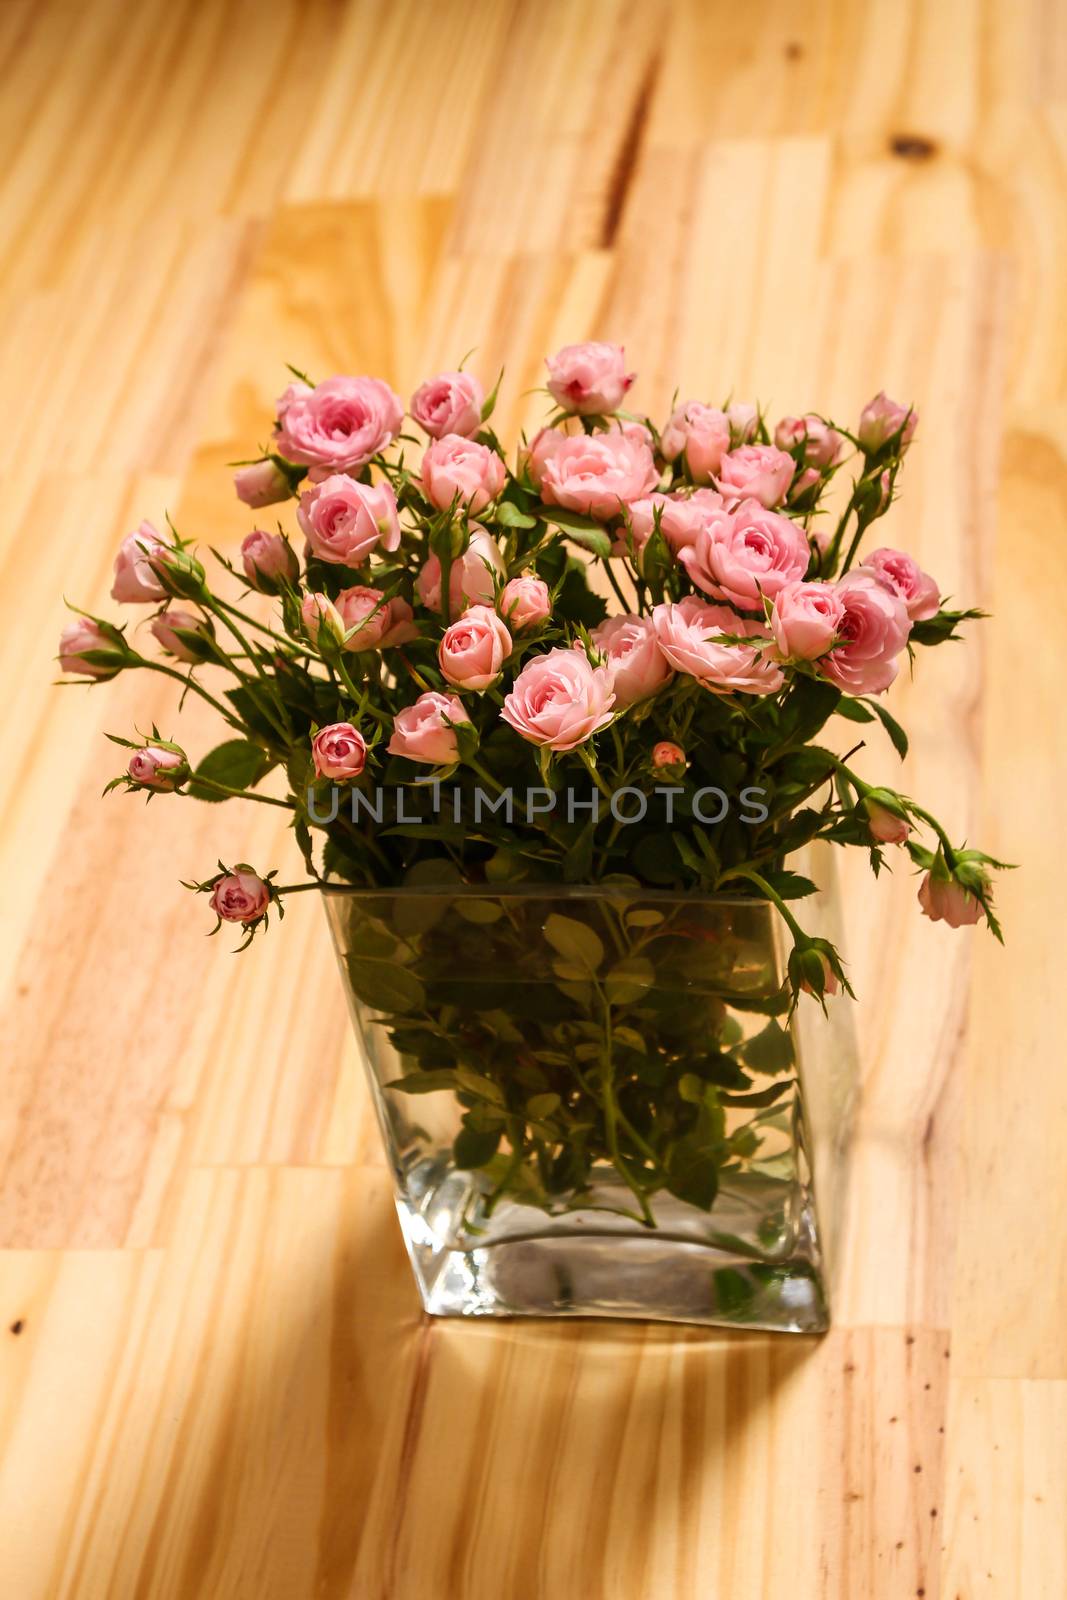 Bunch of small pink Roses in a glass vase over a wooden table.
